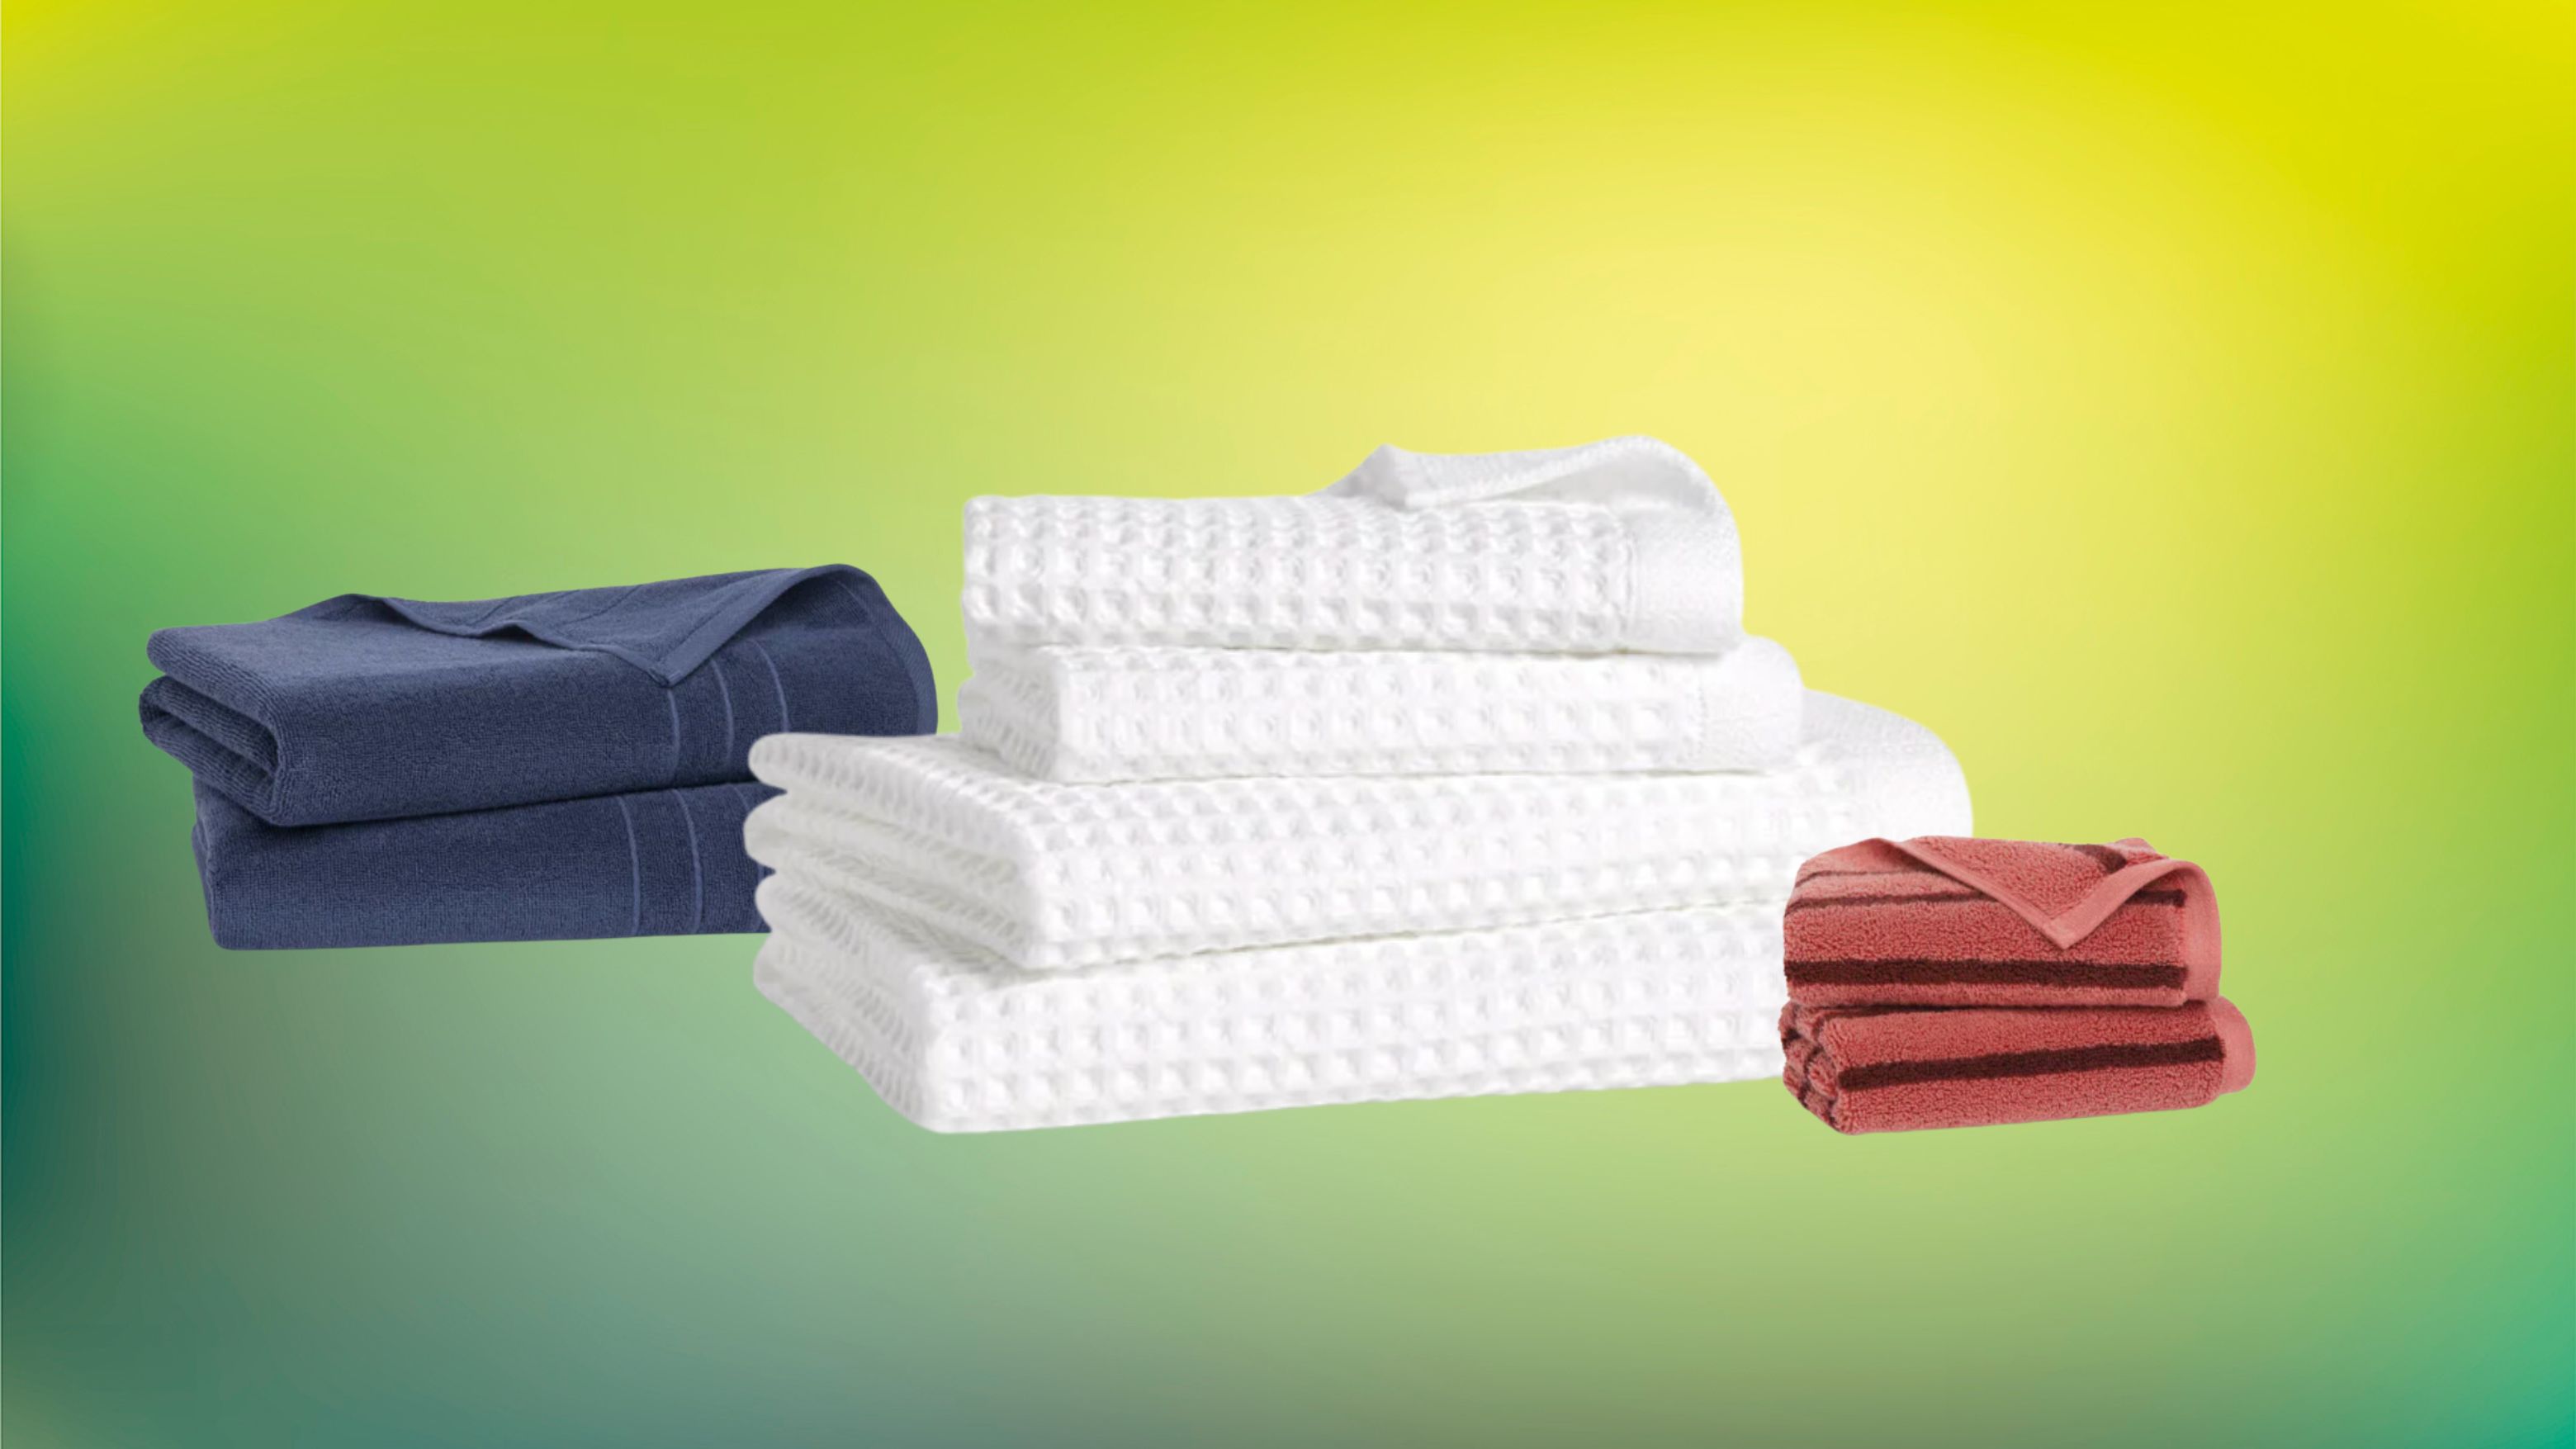 Brooklinen towels are on sale now - get them for 20% off